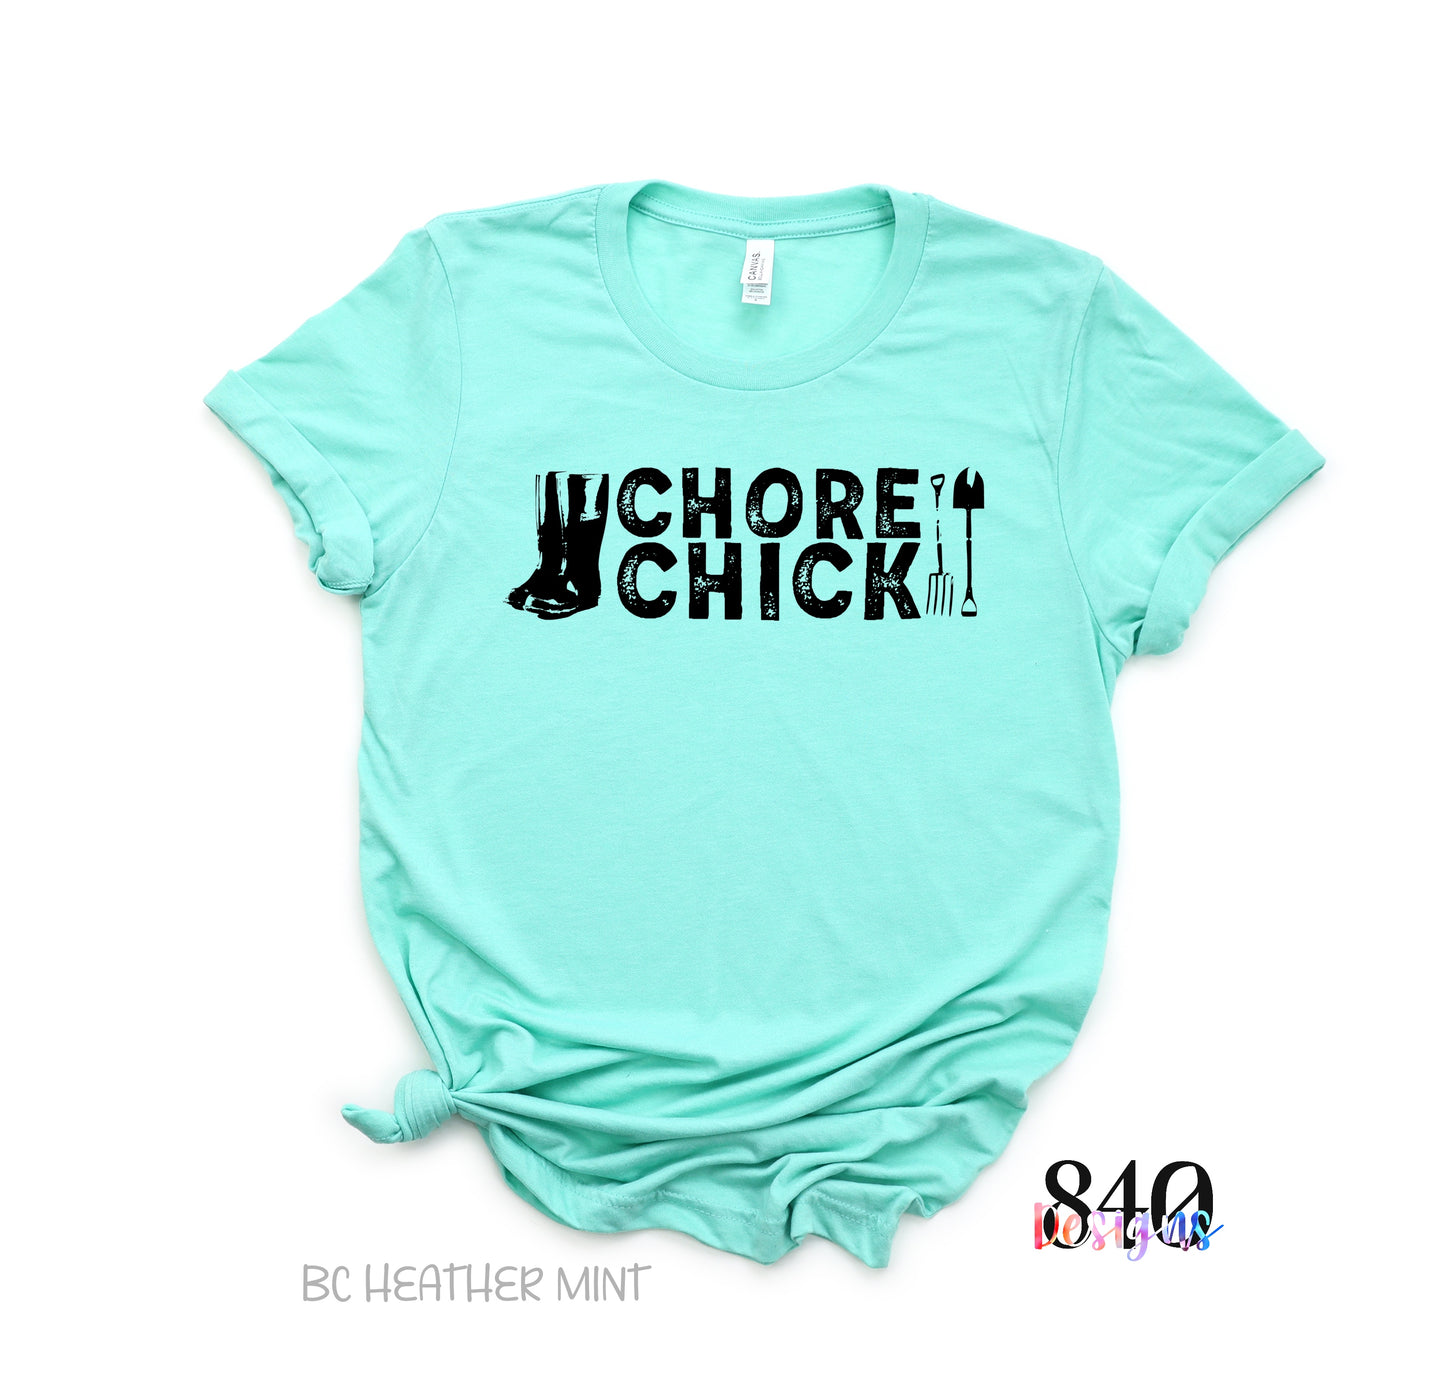 CHORE CHICK - 840 Exclusive